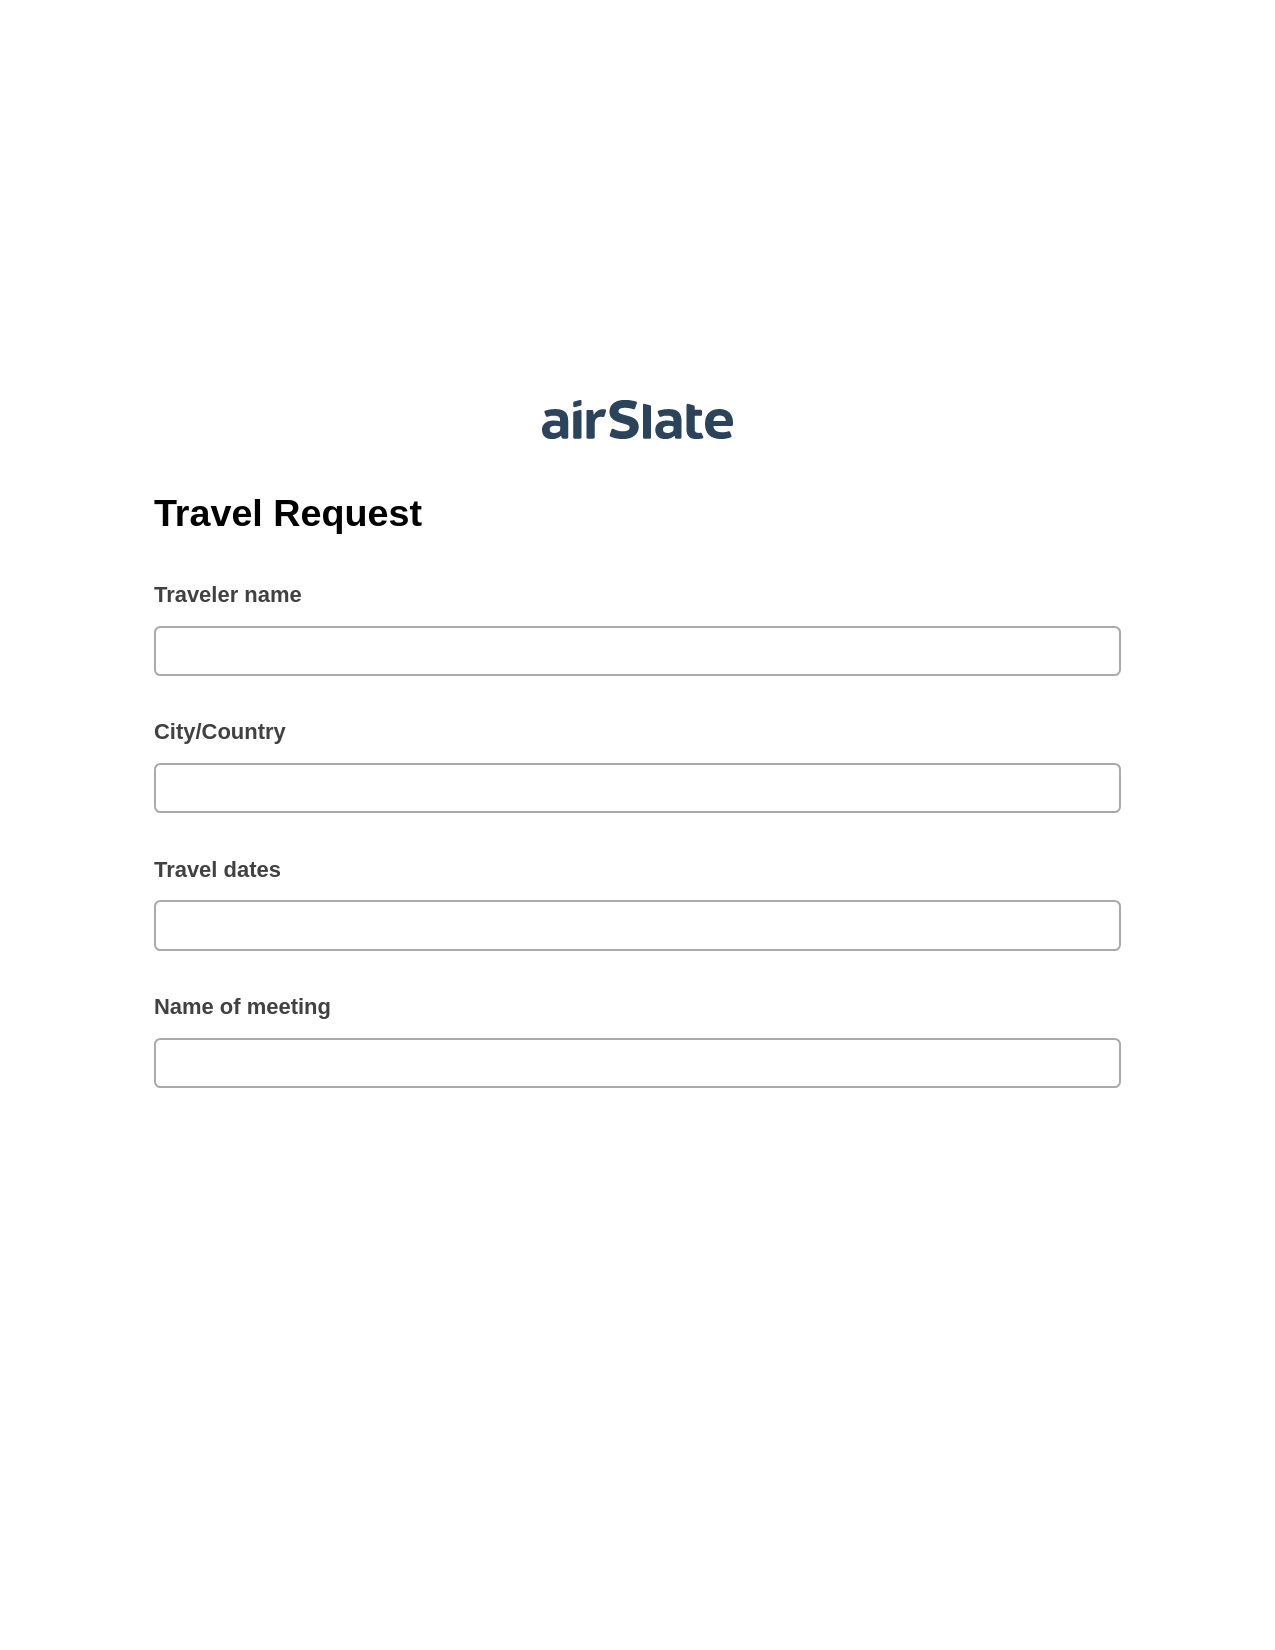 Multirole Travel Request Pre-fill from another Slate Bot, Jira Bot, Export to Salesforce Bot